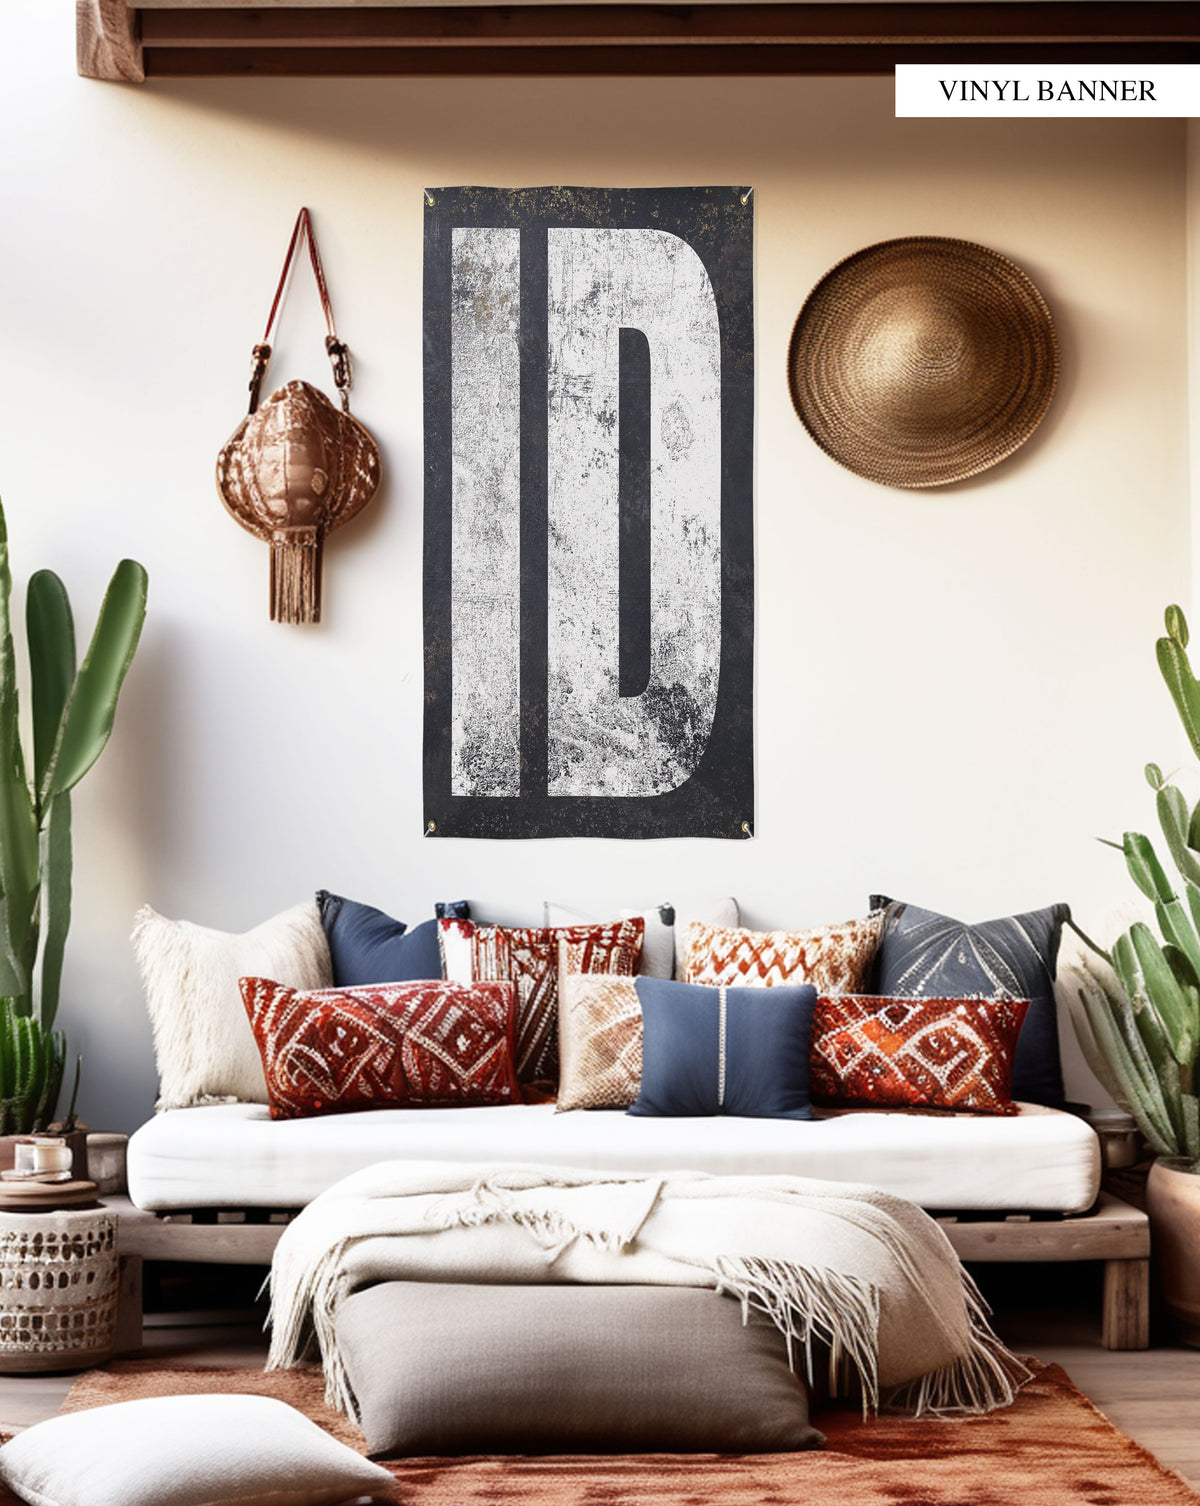 "Rustic Idaho State Patio Decor: This vinyl sign captures the essence of Idaho with a western flair, making it an ideal addition to outdoor home bars, patios, or as a heartfelt moving state gift."